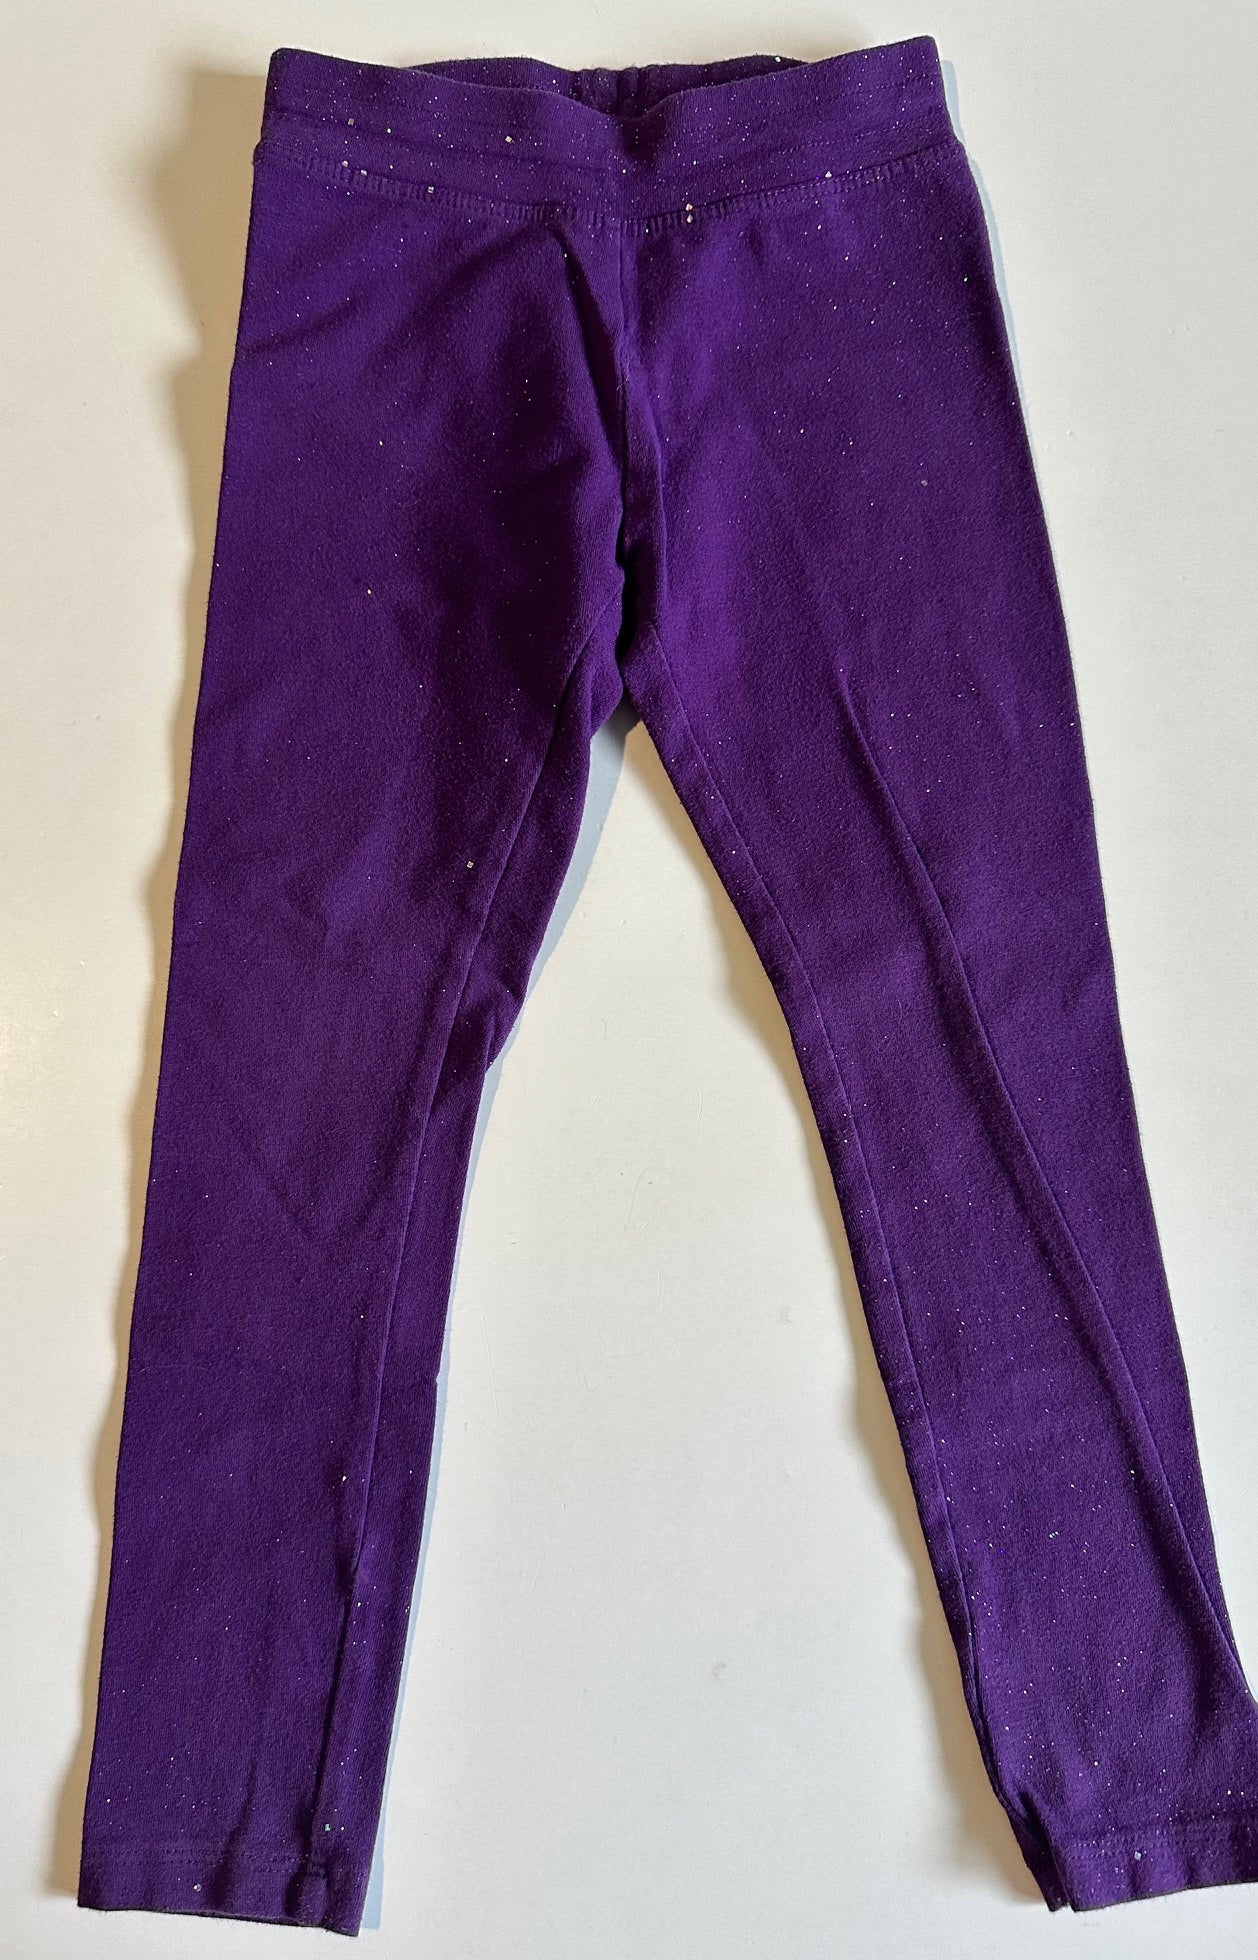 Play* George, Purple Sparkly Leggings - Size XS (4-5) – Linen for